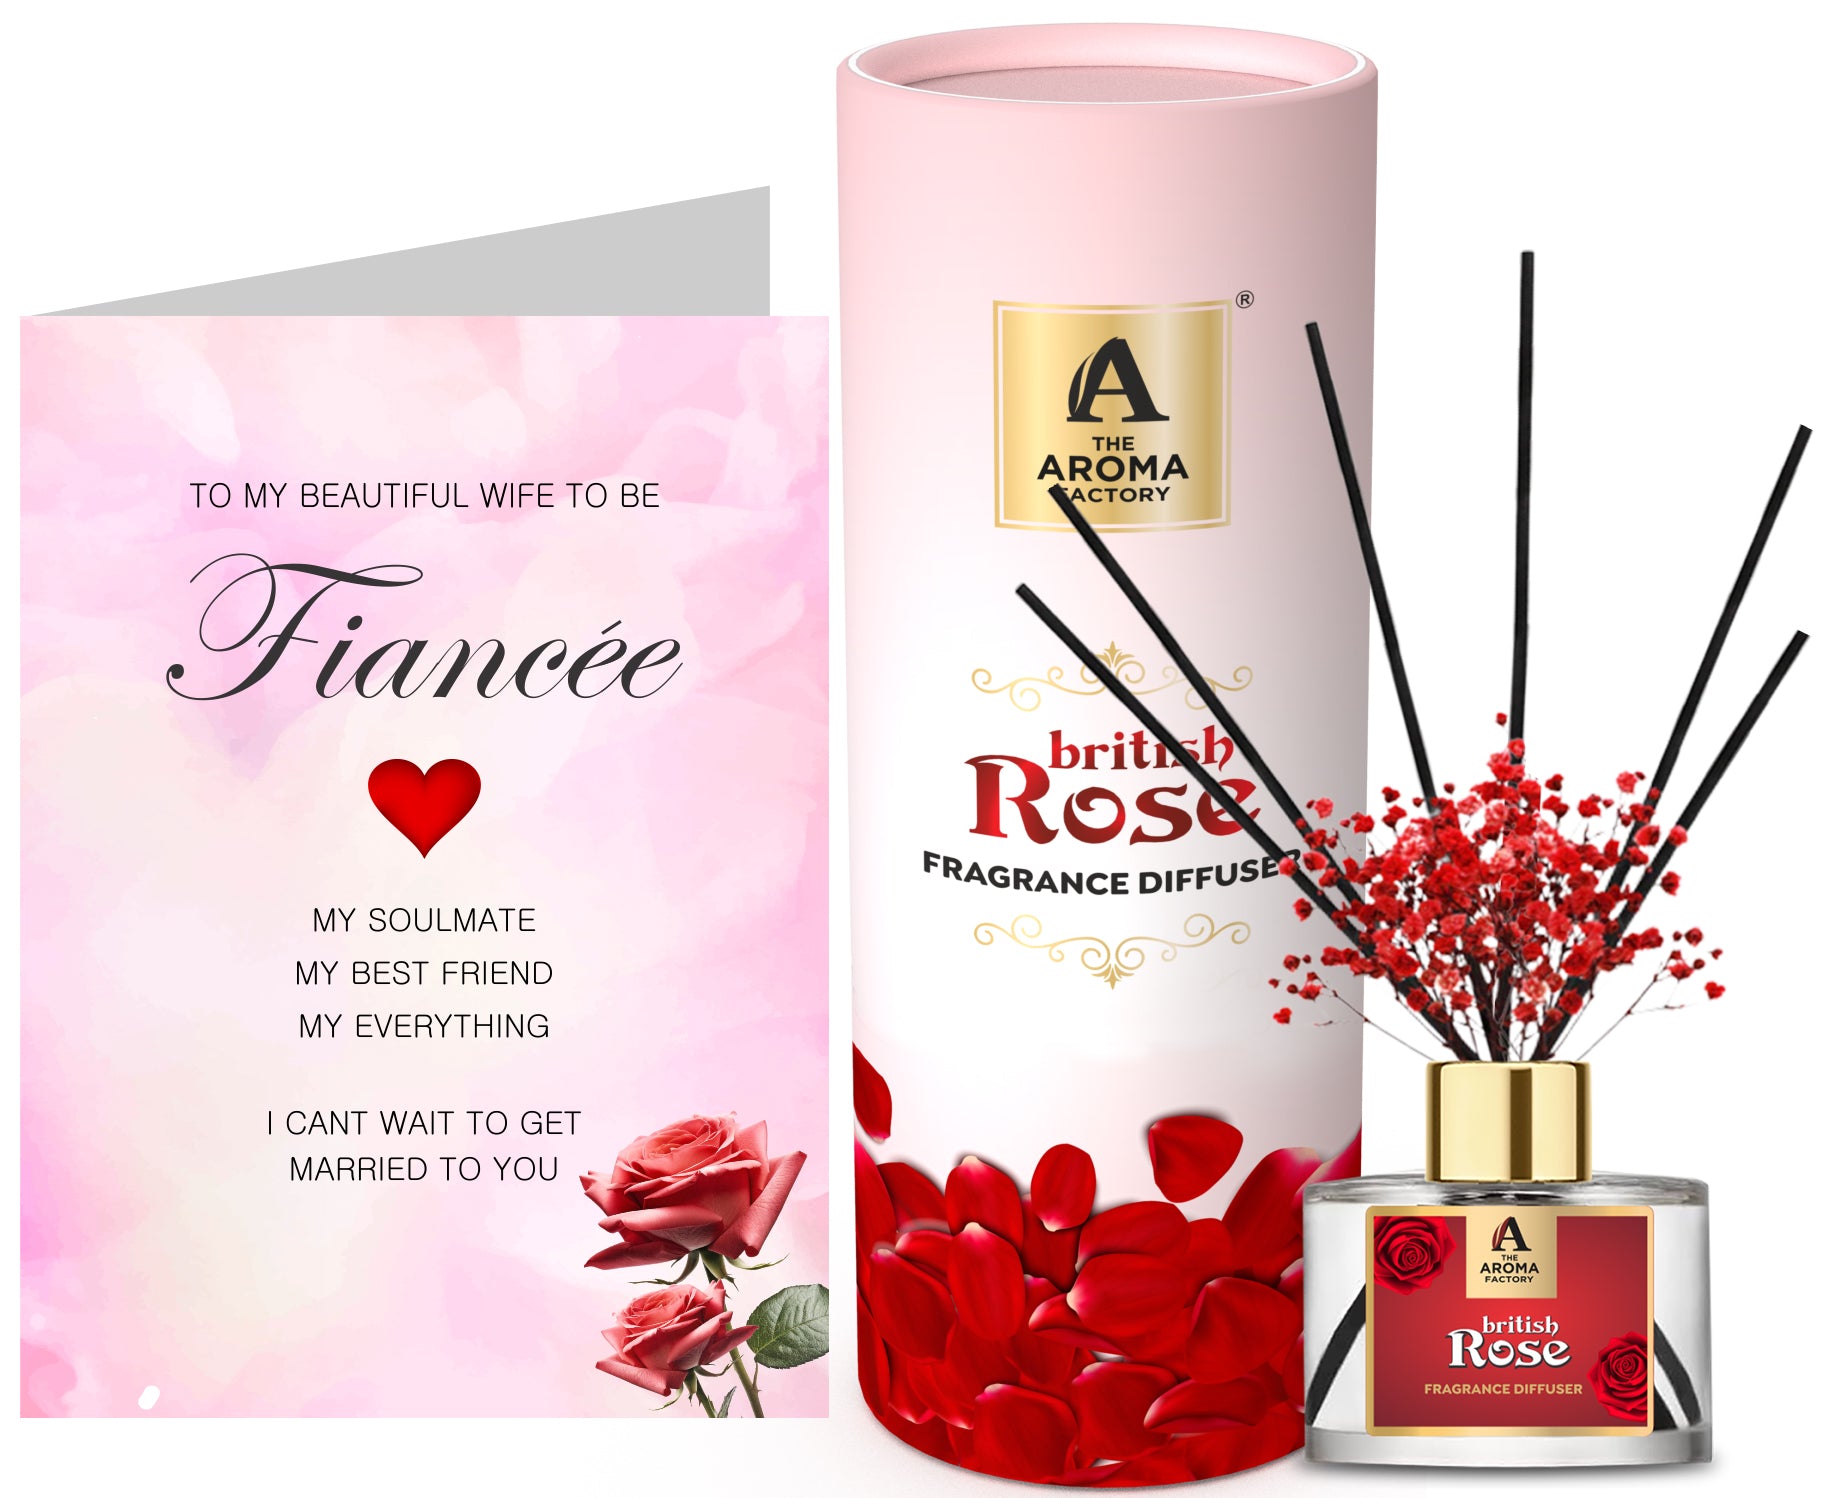 The Aroma Factory Gift for Fiancee Female/Wife to be with Card, British Rose Fragrance Reed Diffuser Set (1 Box &1 Card)